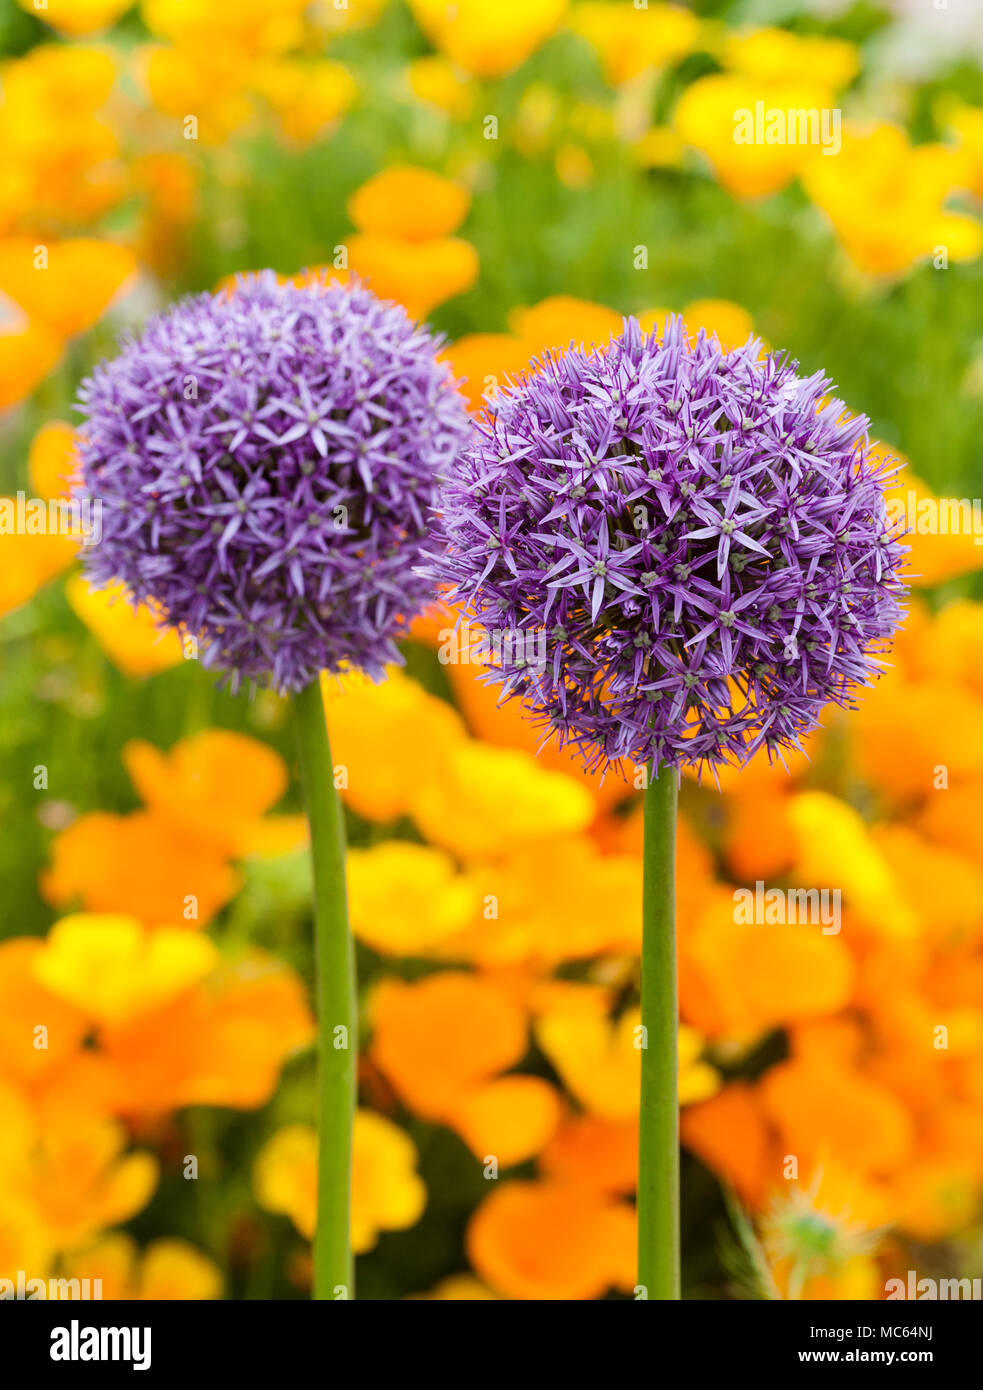 large purple alliums against a background of california poppies in a drought resistant garden Stock Photo